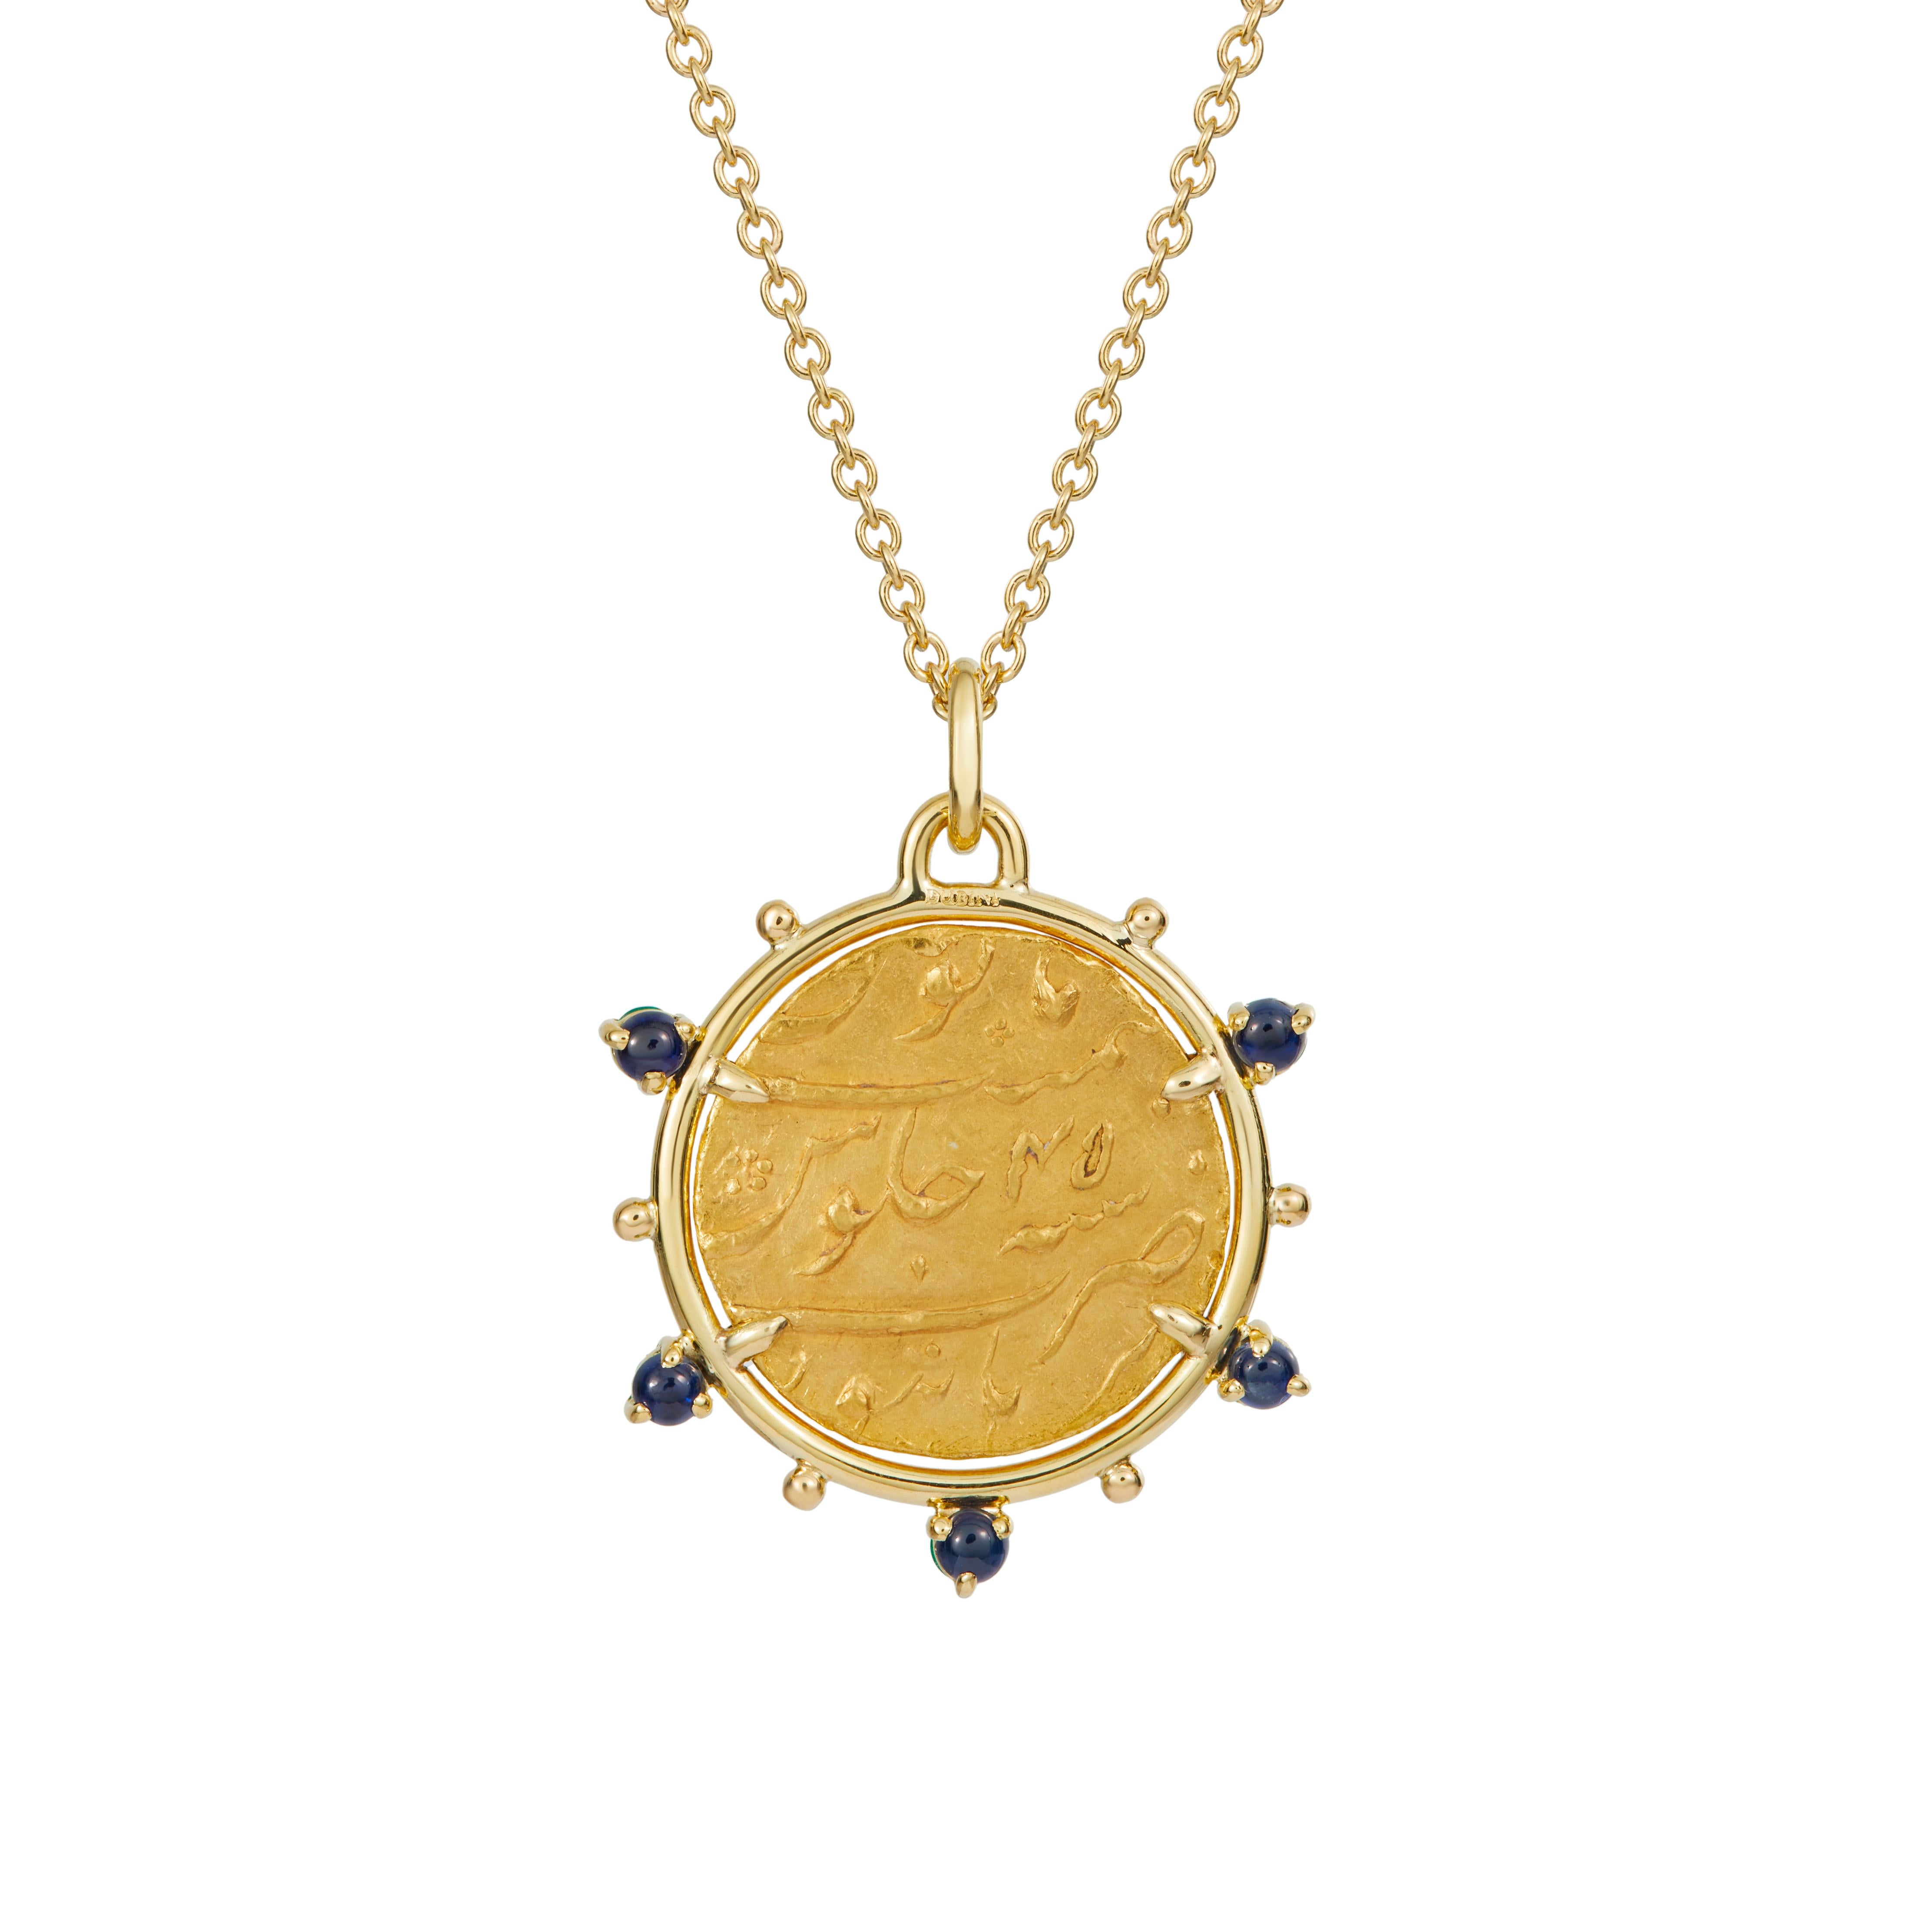 This DUBINI coin necklace from the 'Empires' collection features an ancient Mughal Empire yellow gold coin set in 18K yellow gold with emerald and sapphire cabochons.

Handmade in Rome.

Coin Ø 23mm
Chain length - 47cm 

DEPICTED ON THE COIN
India,